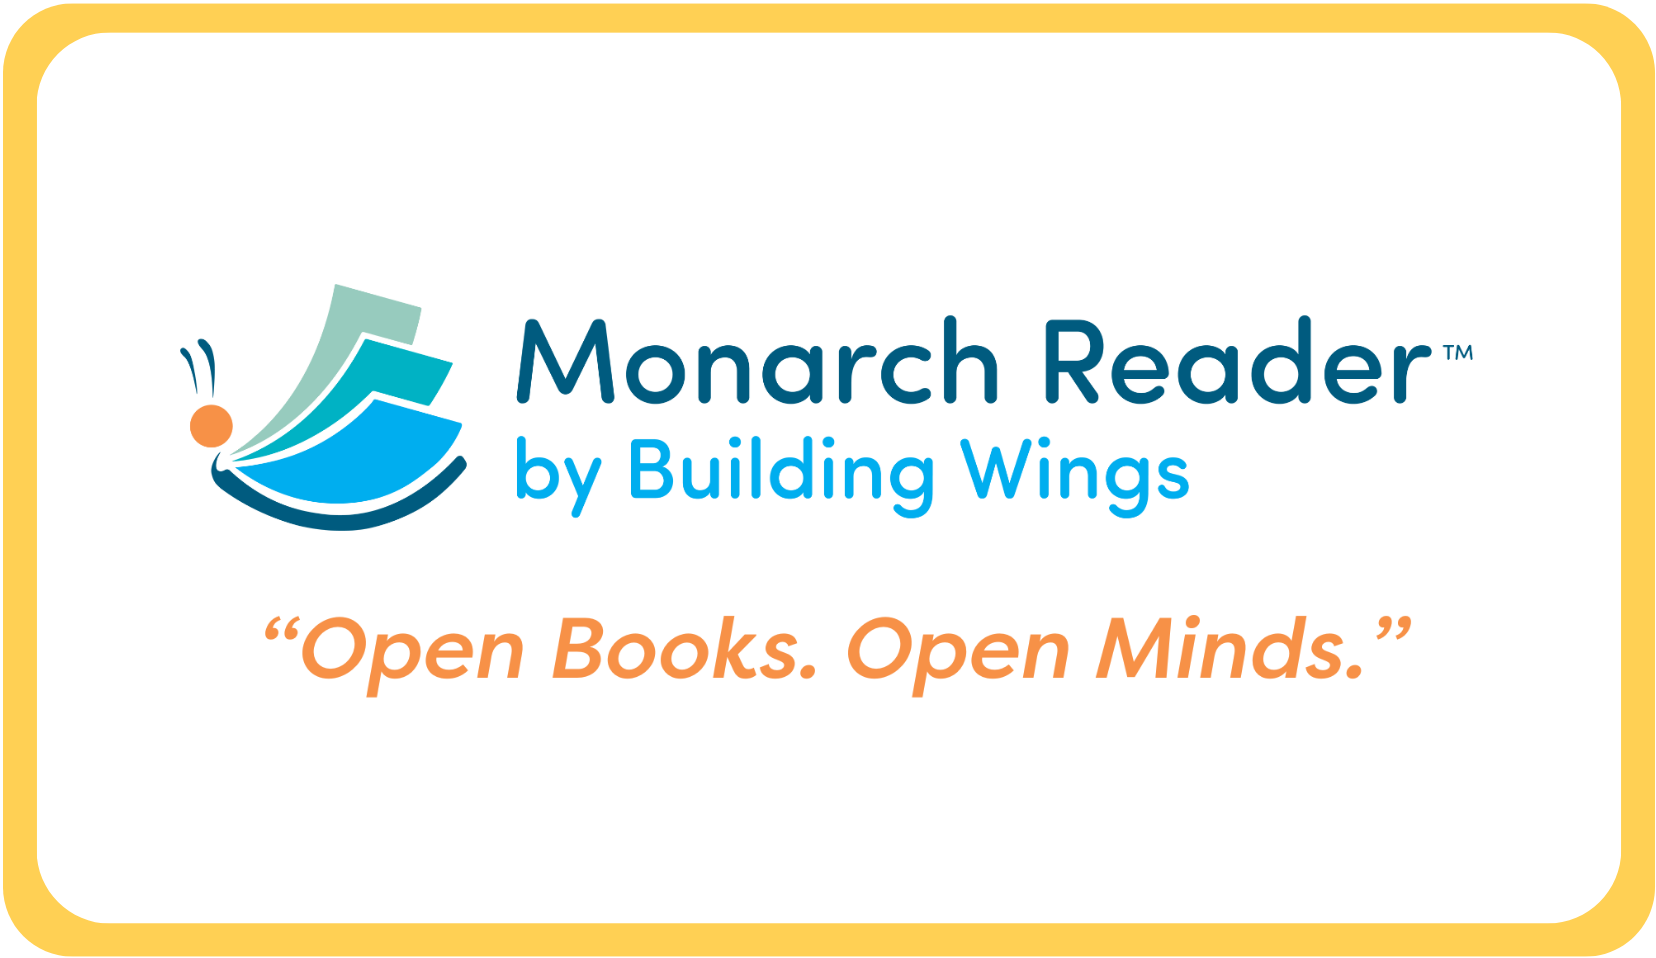 Monarch Reader by Building Wings - Open Books Open Minds - Online books for beginning readers of all ages.